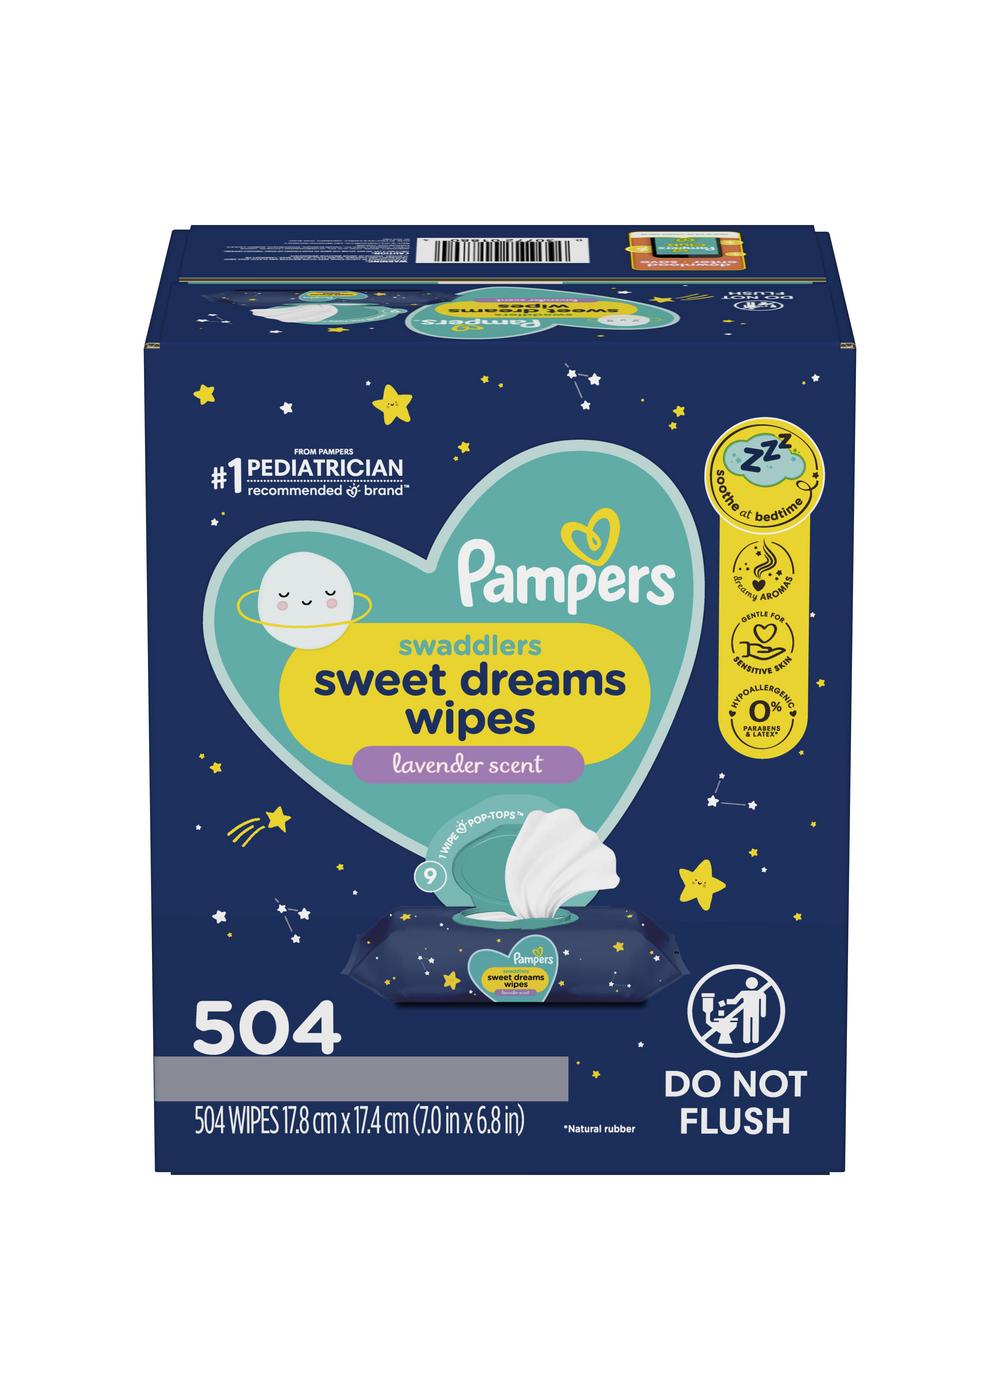 Pampers Fresh Scented Baby Wipes 3 Pk - Shop Baby Wipes at H-E-B